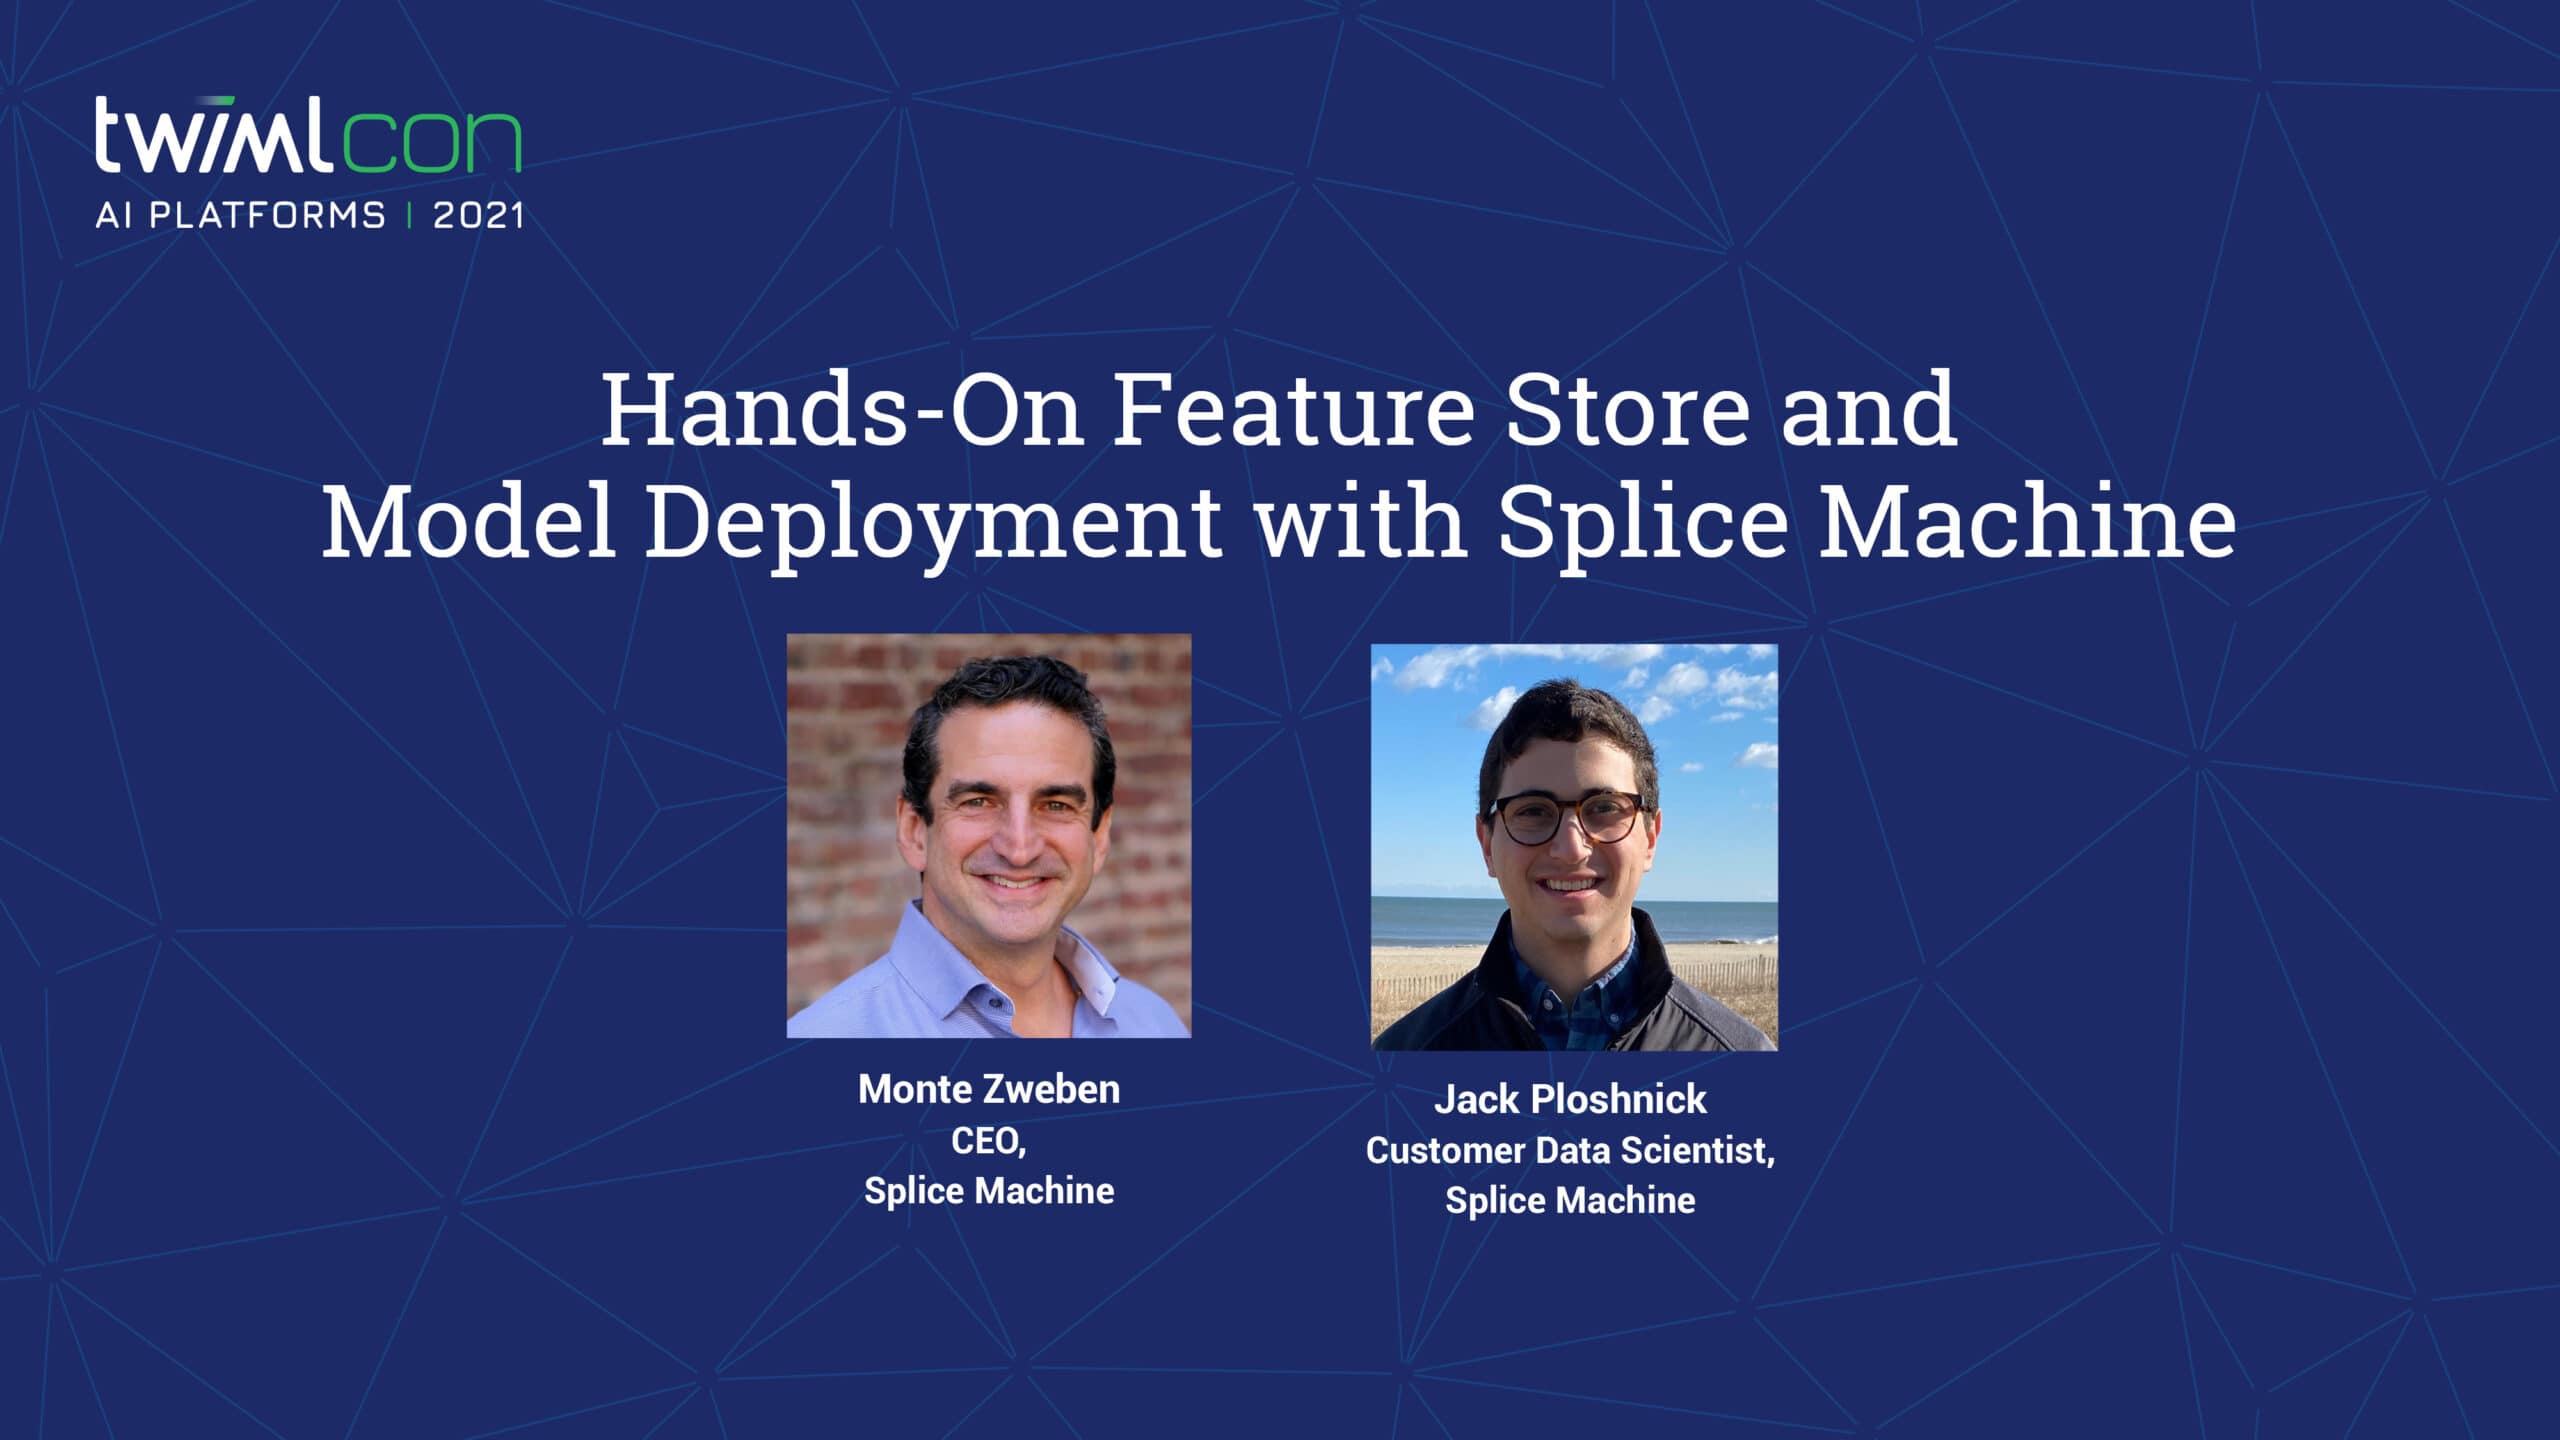 Hands-On Feature Store and Model Deployment with Splice Machine